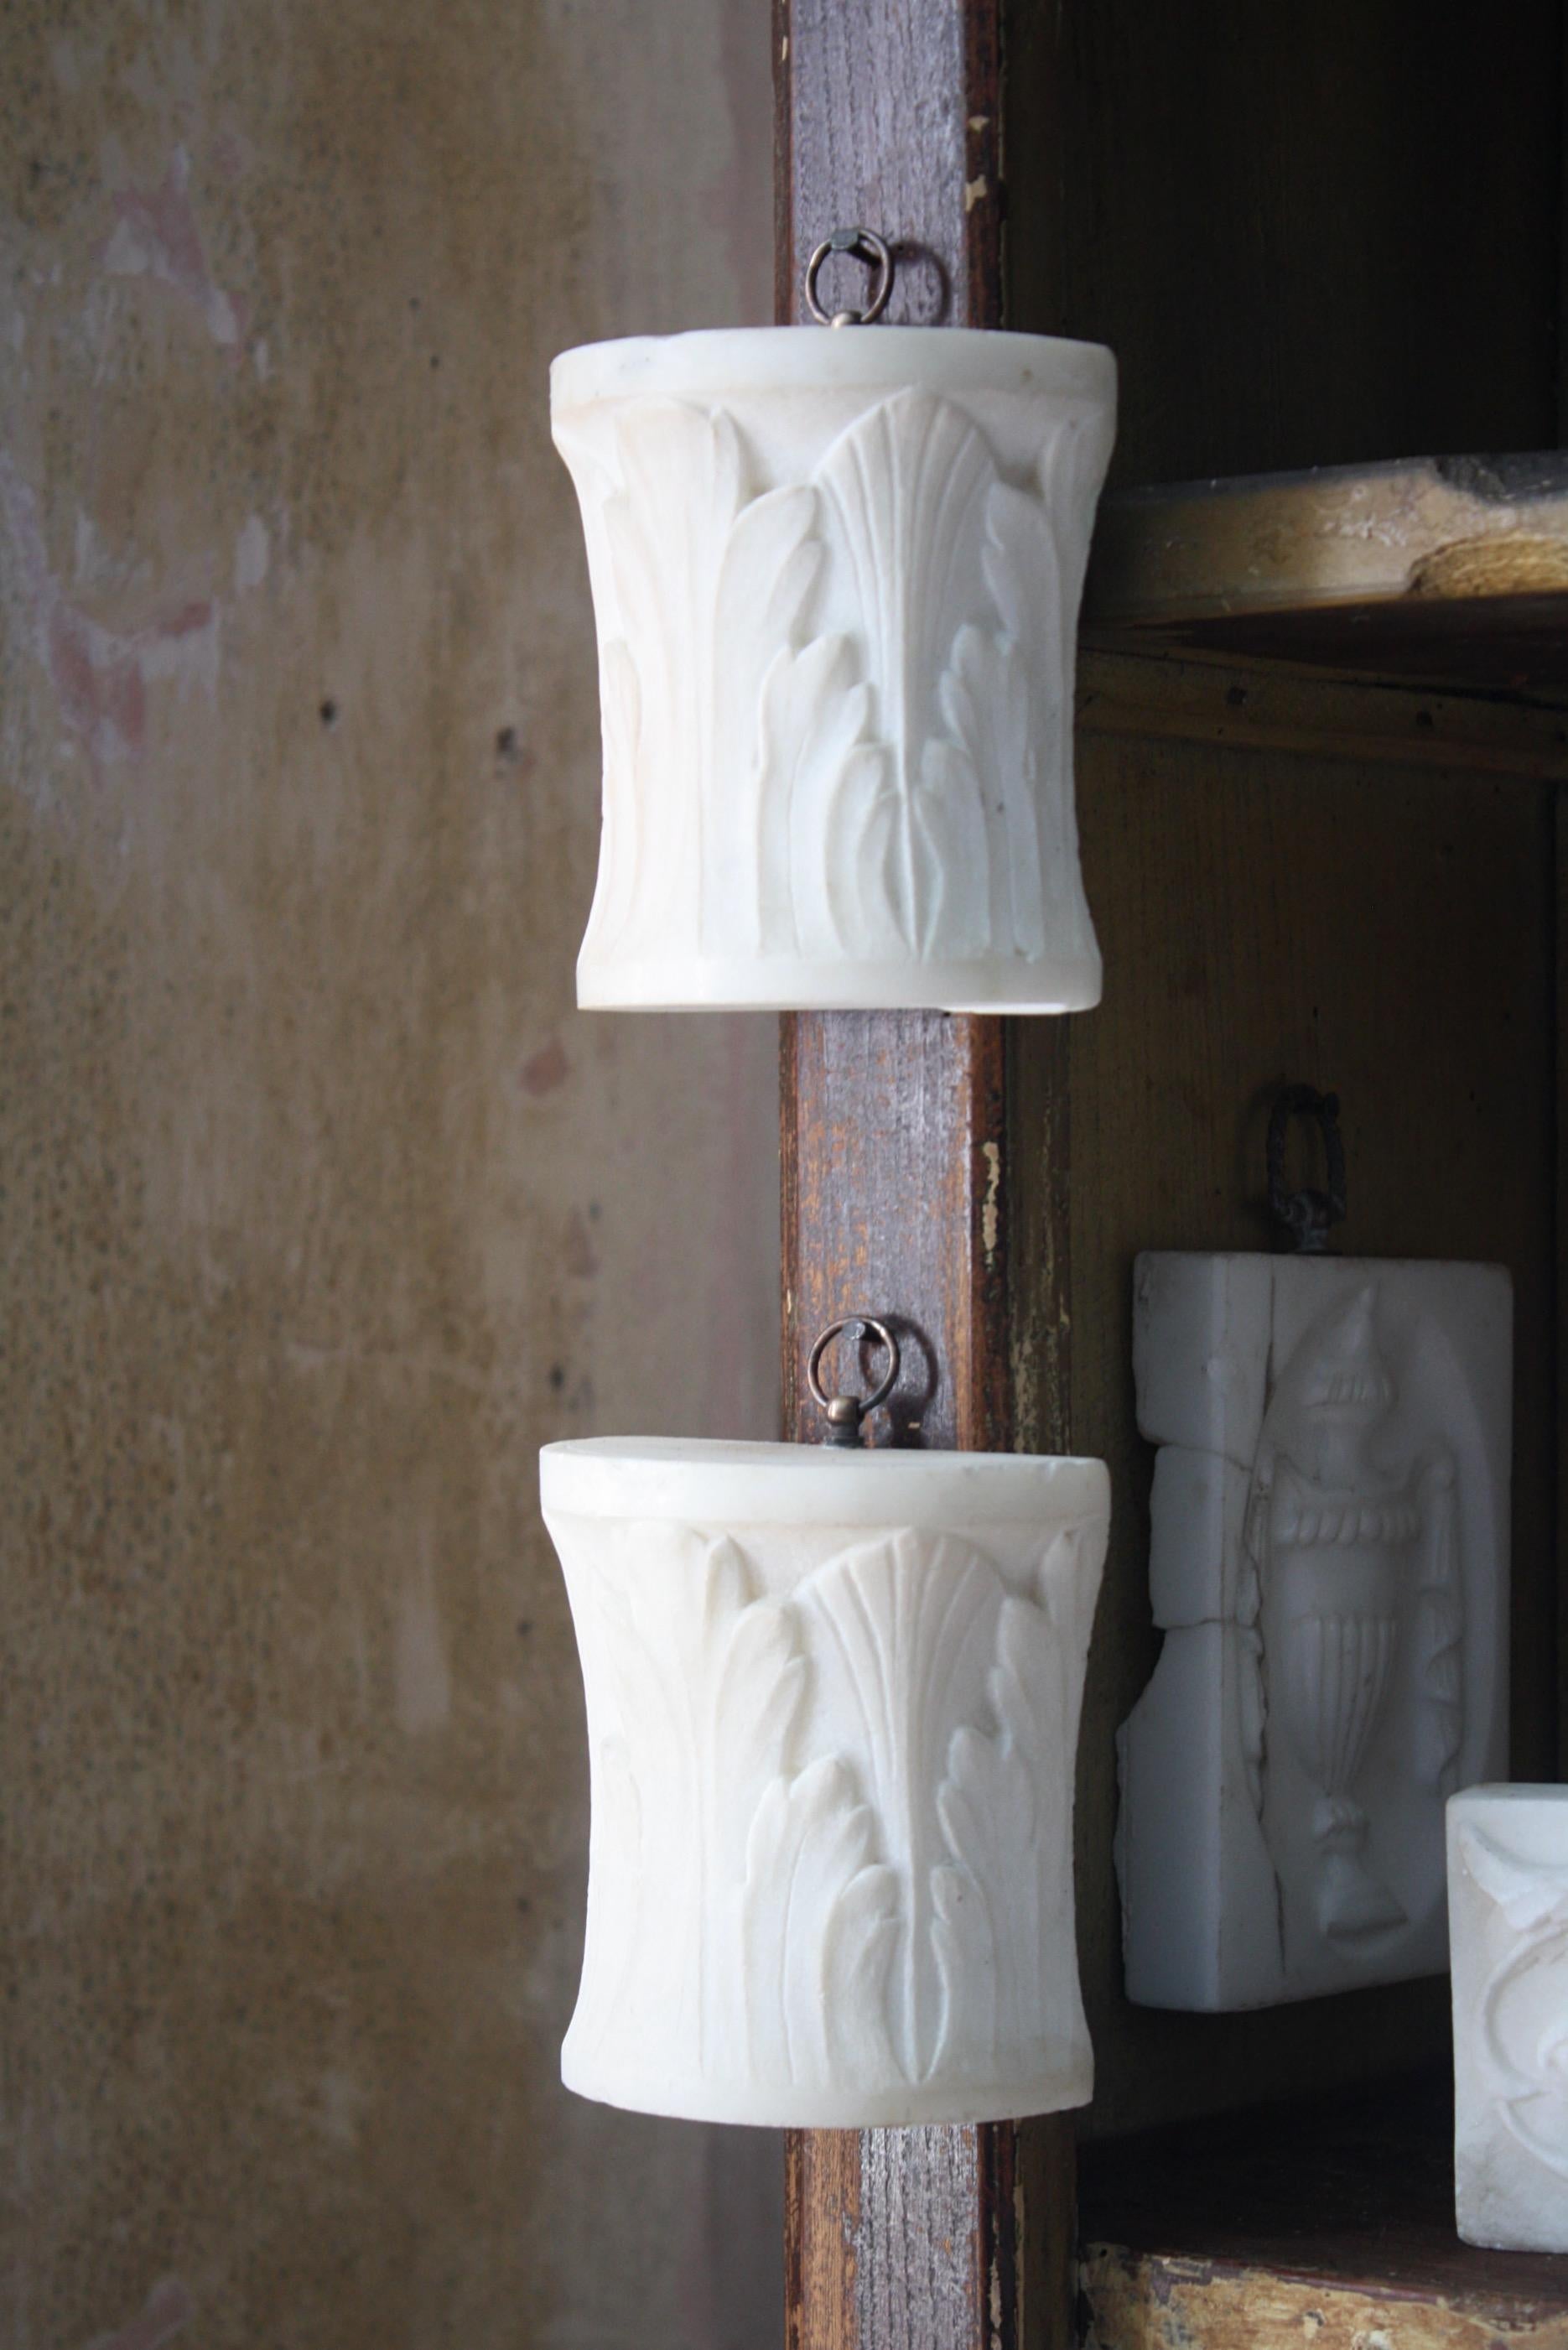 English 18th C Pair of Carved Marble Corbels Organic Decorative Architectural Elements